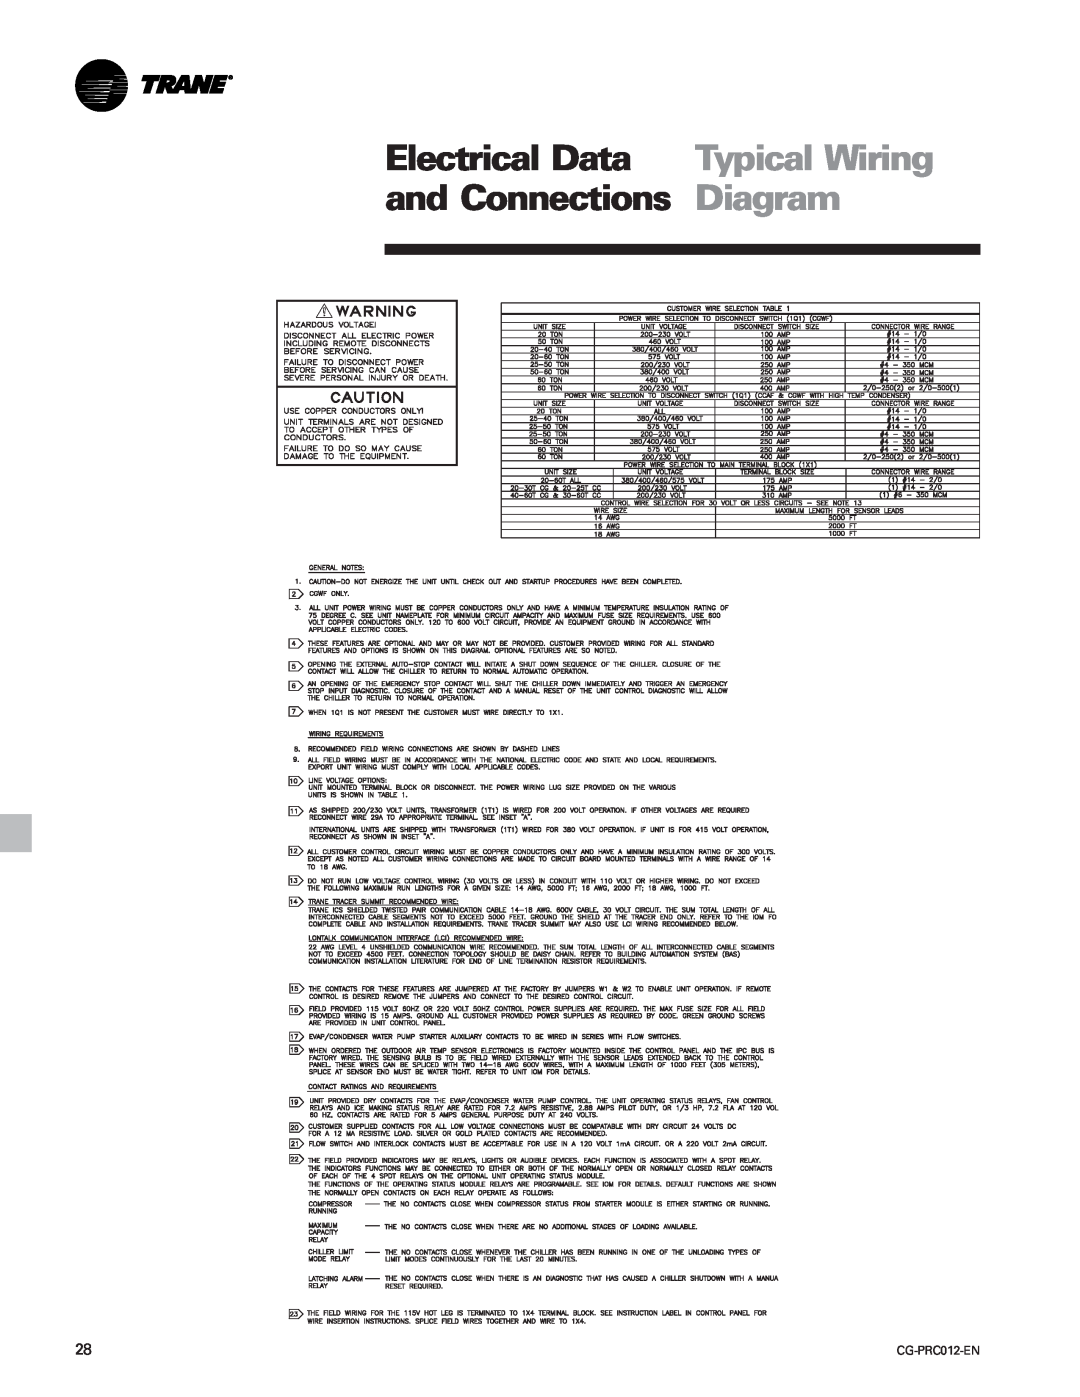 Trane CGWF, CCAF manual Electrical Data, Typical Wiring, and Connections, Diagram 